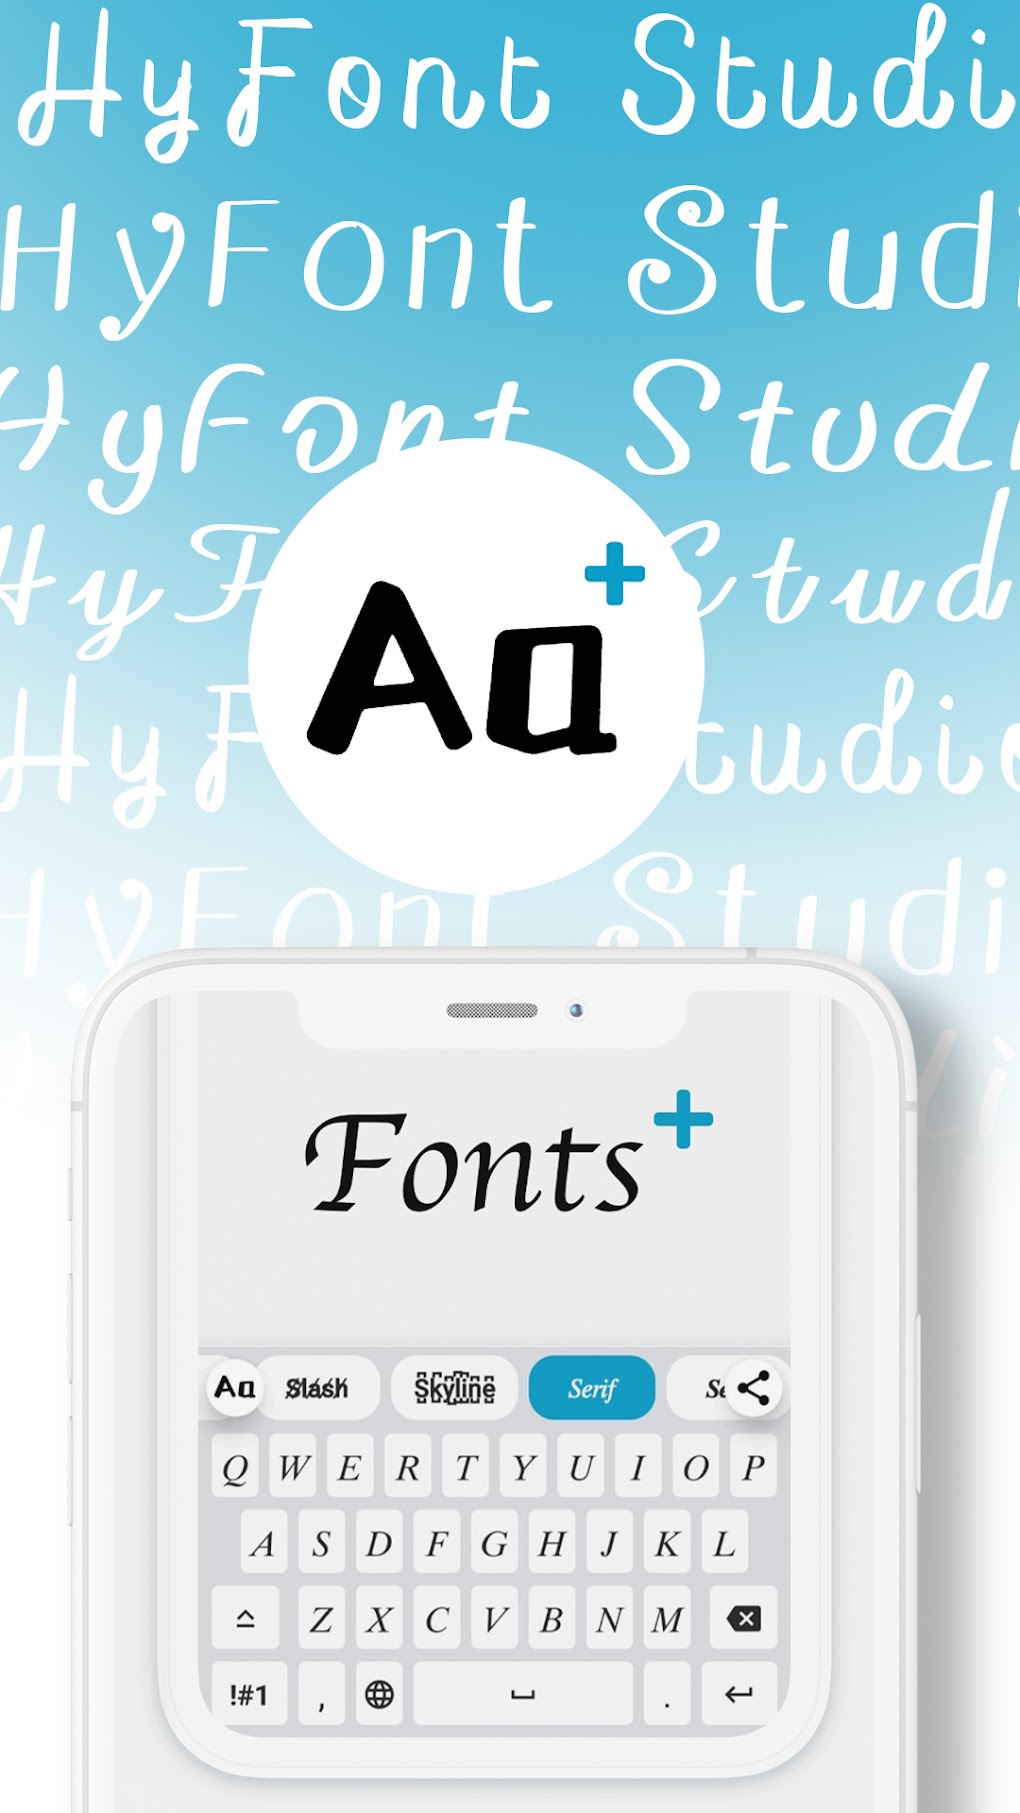 Free download Stylish Fonts Keyboard APK for Android